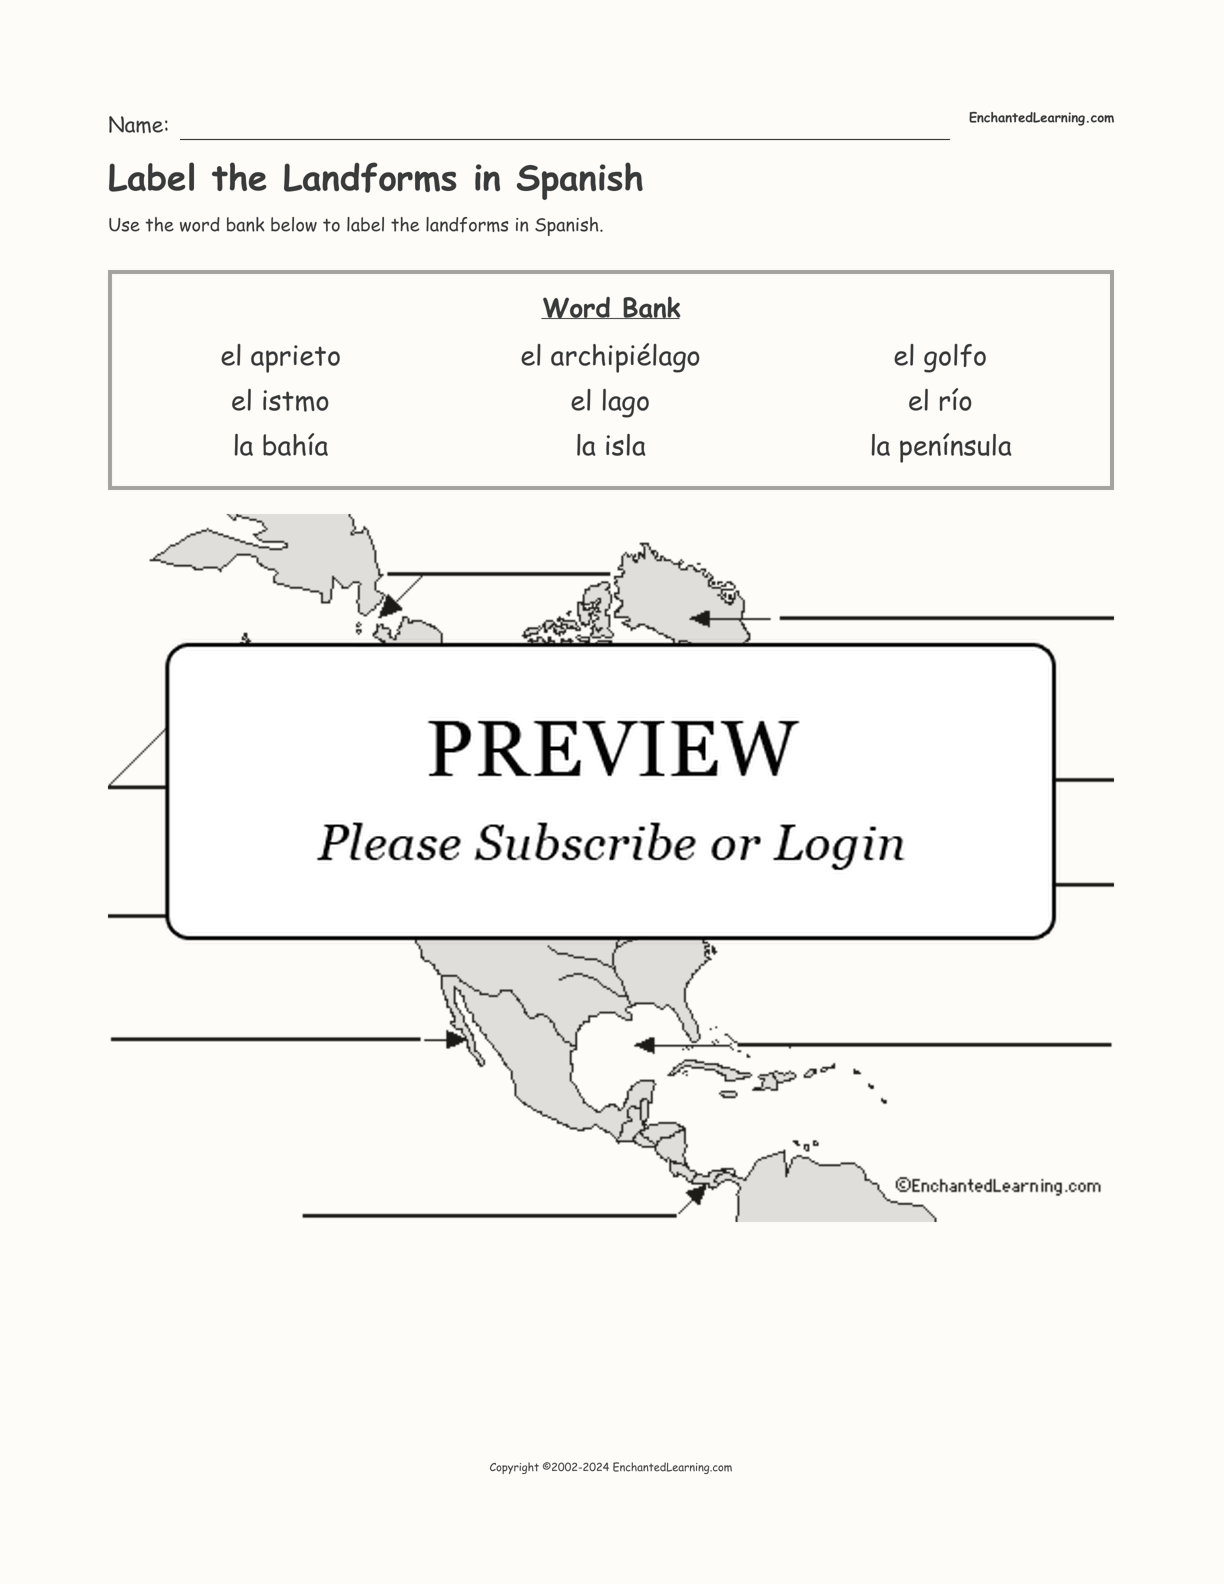 Label the Landforms in Spanish interactive worksheet page 1